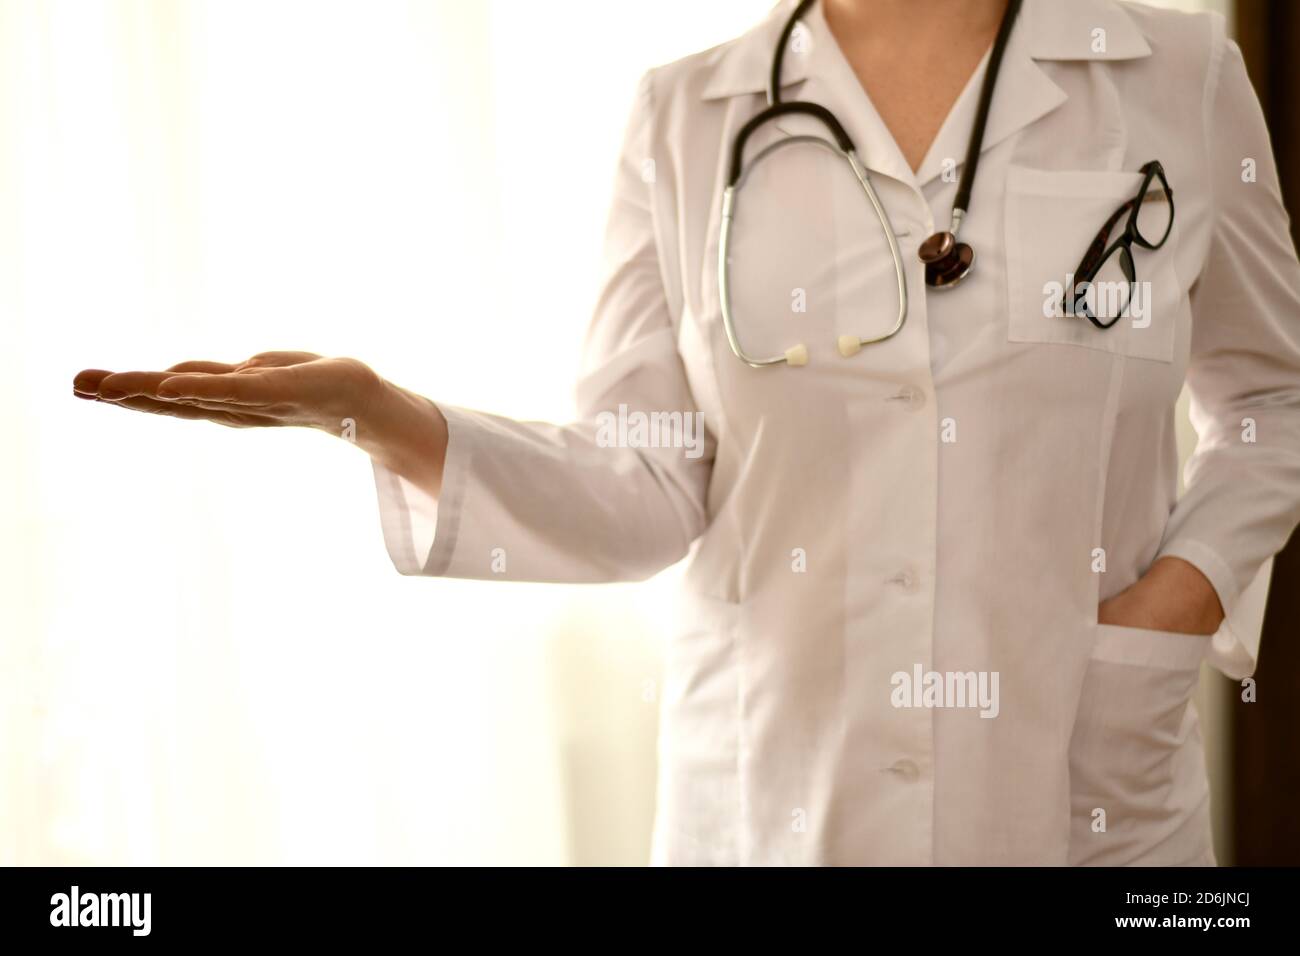 The doctor stands in front, one empty hand palm outstretched, the other hand in the pocket of a white robe.  Stock Photo